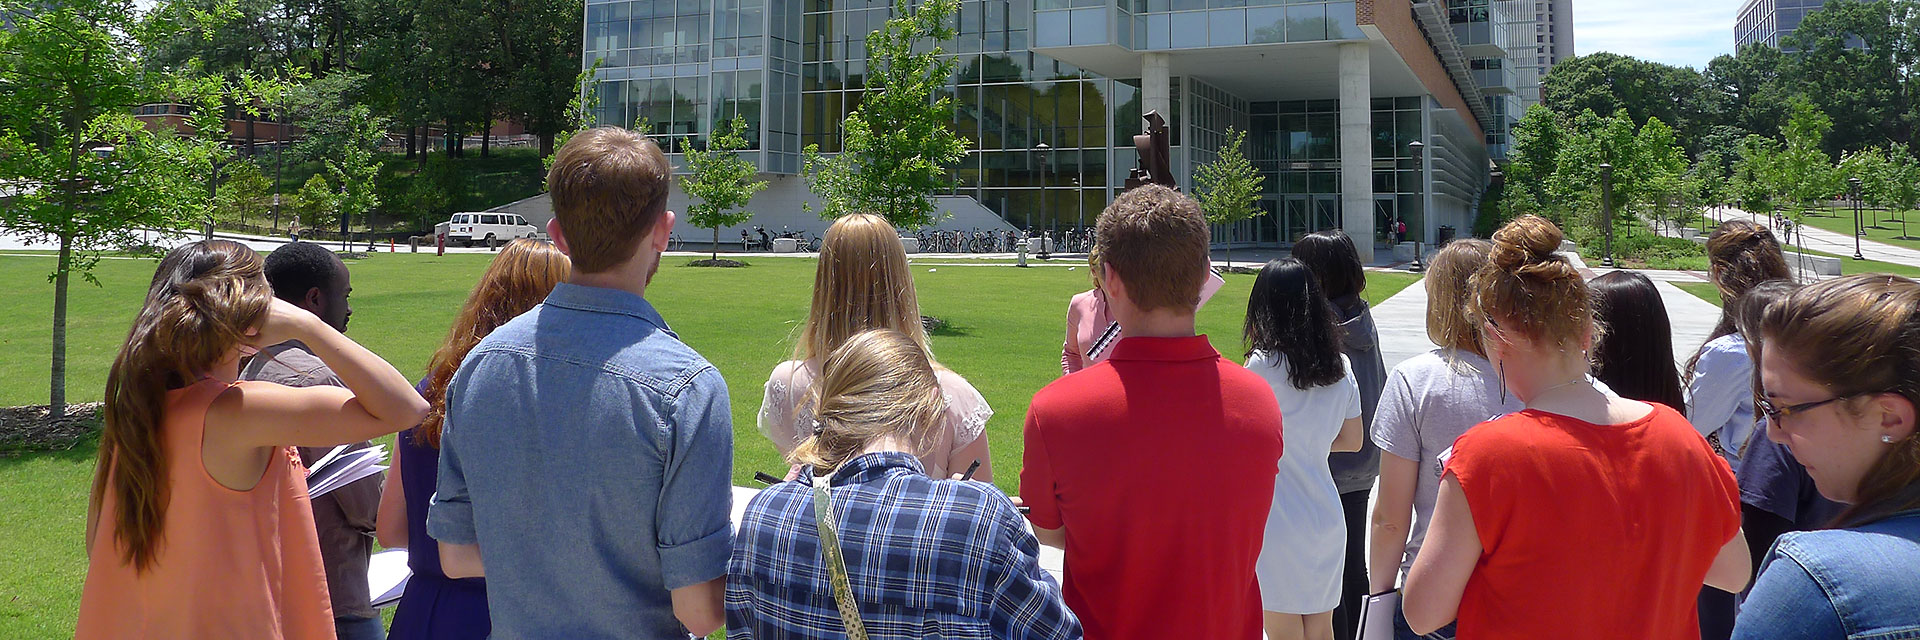 Visiting prospective students stand in front of the Architecture West building, looking at Clough Commons.